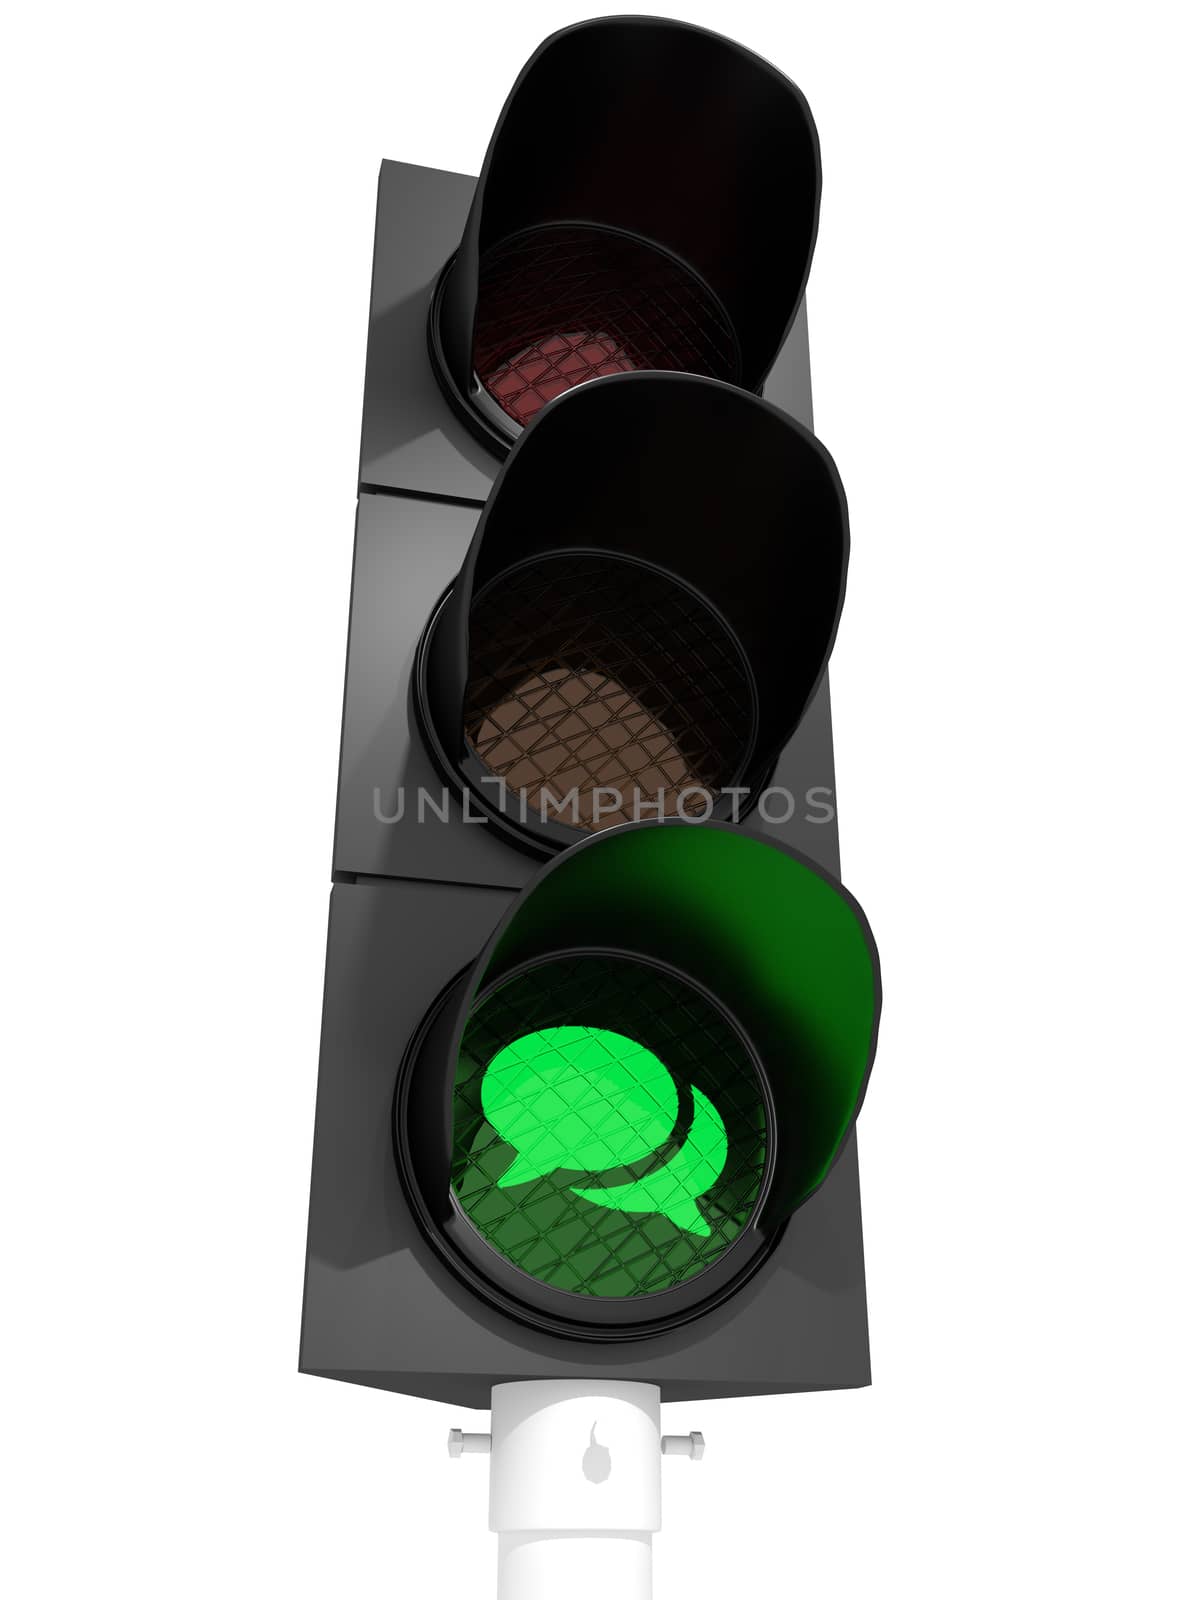 Traffic light showing a "talking"-sign